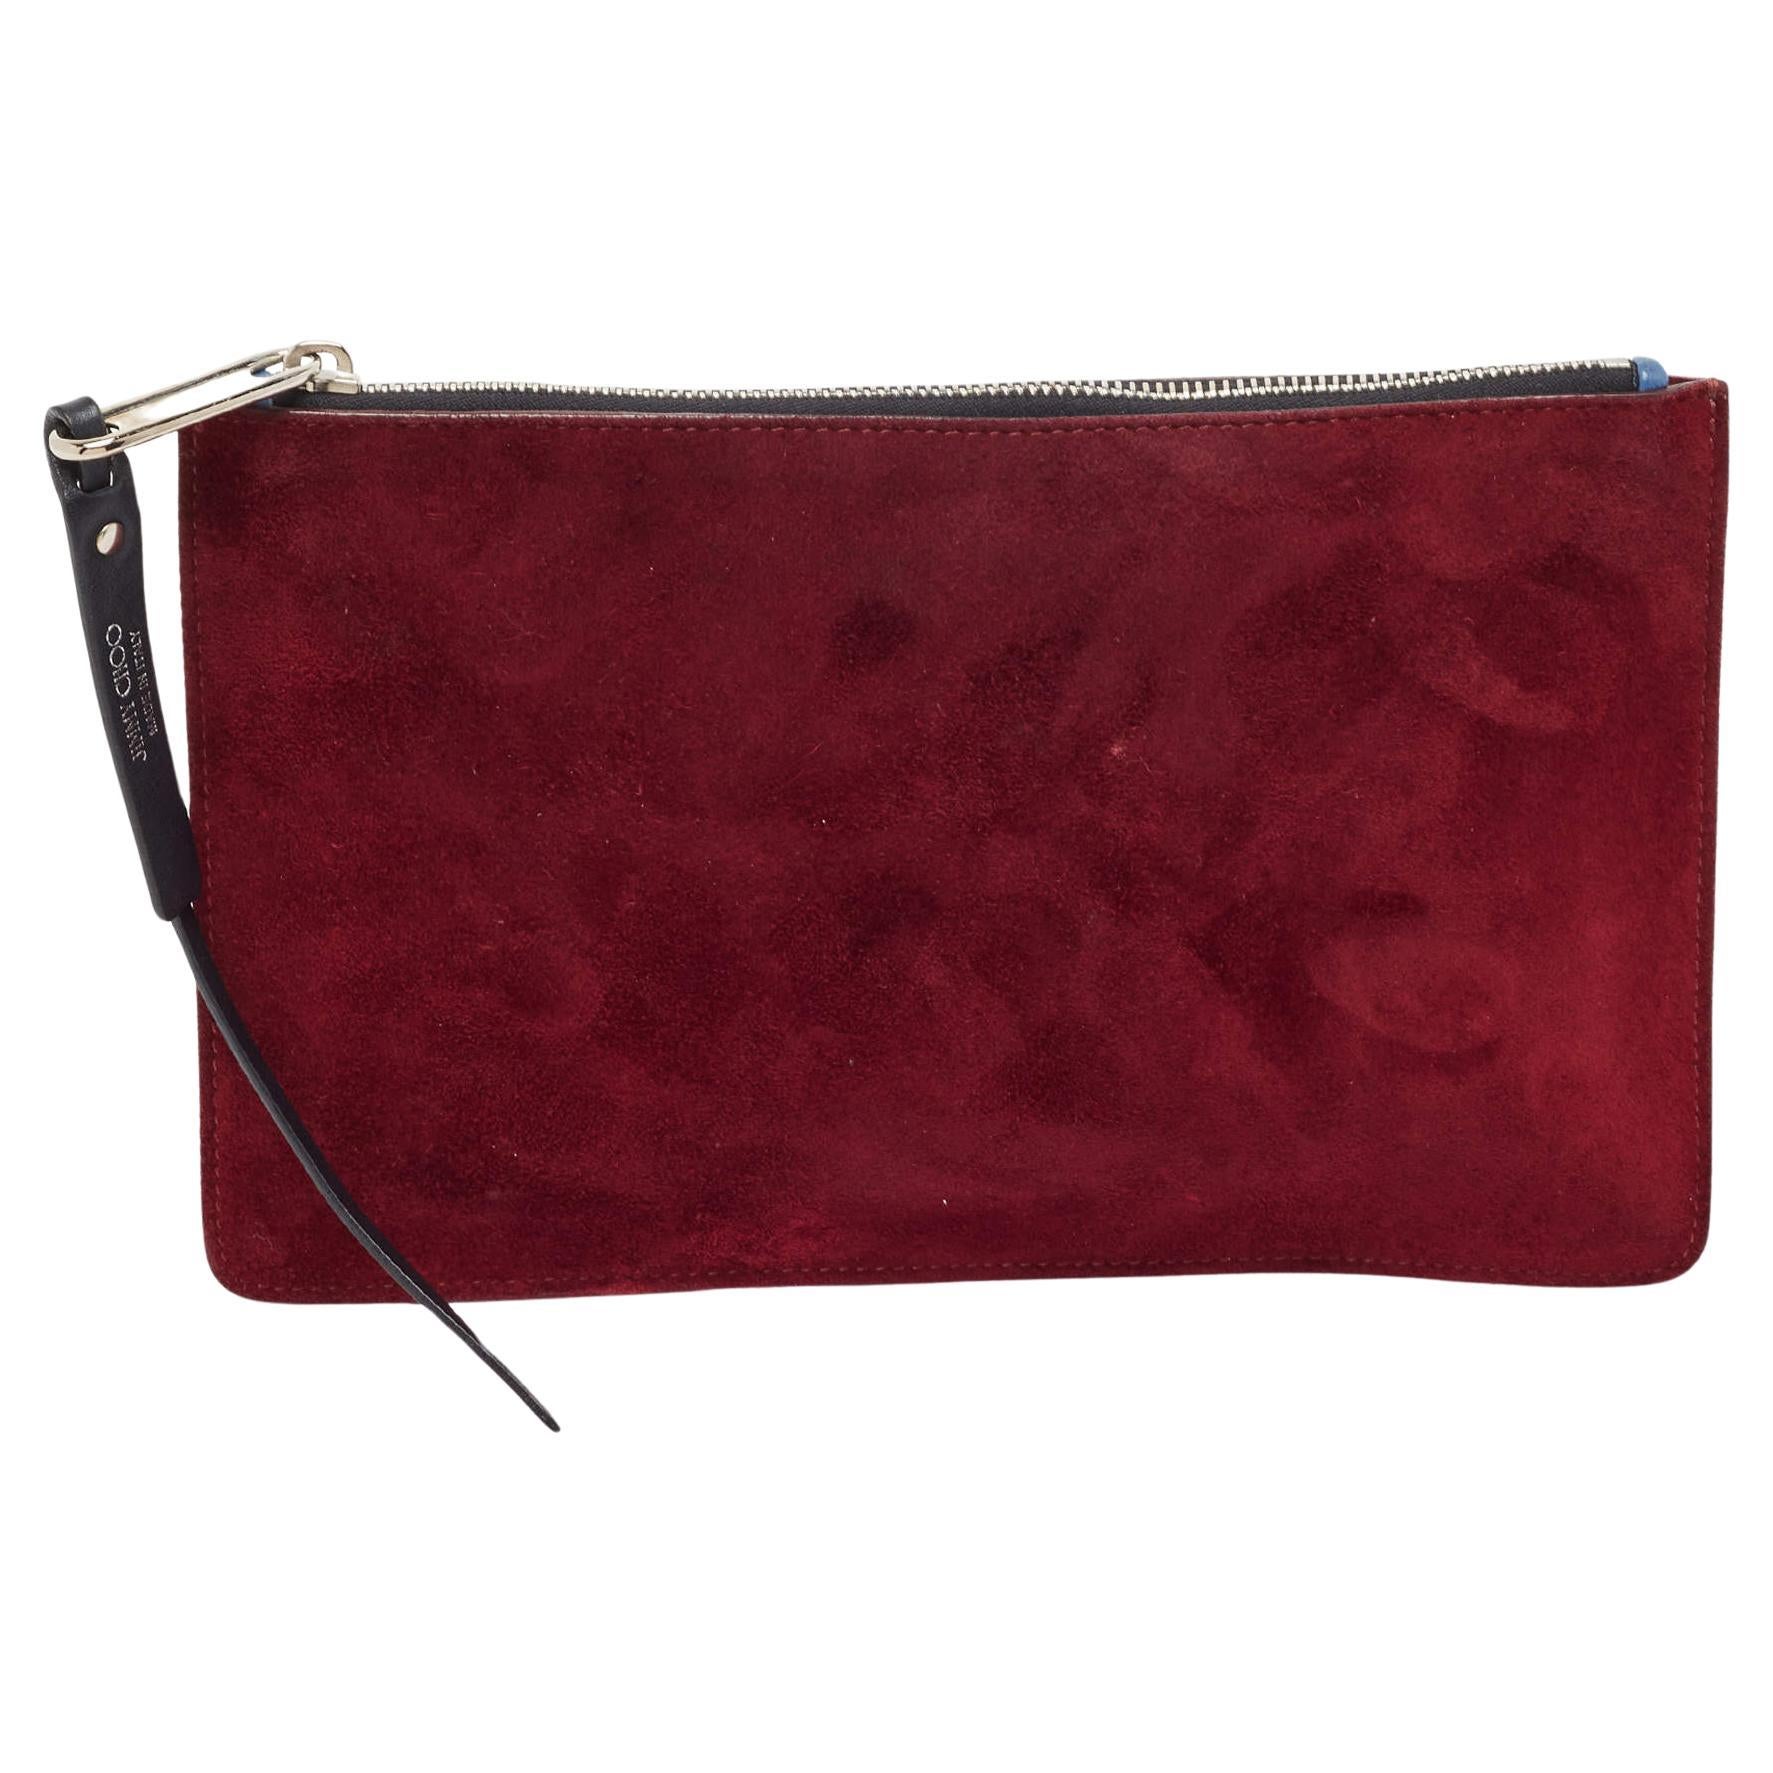 Jimmy Choo Blue/Burgundy Leather and Suede Zip Slim Clutch For Sale